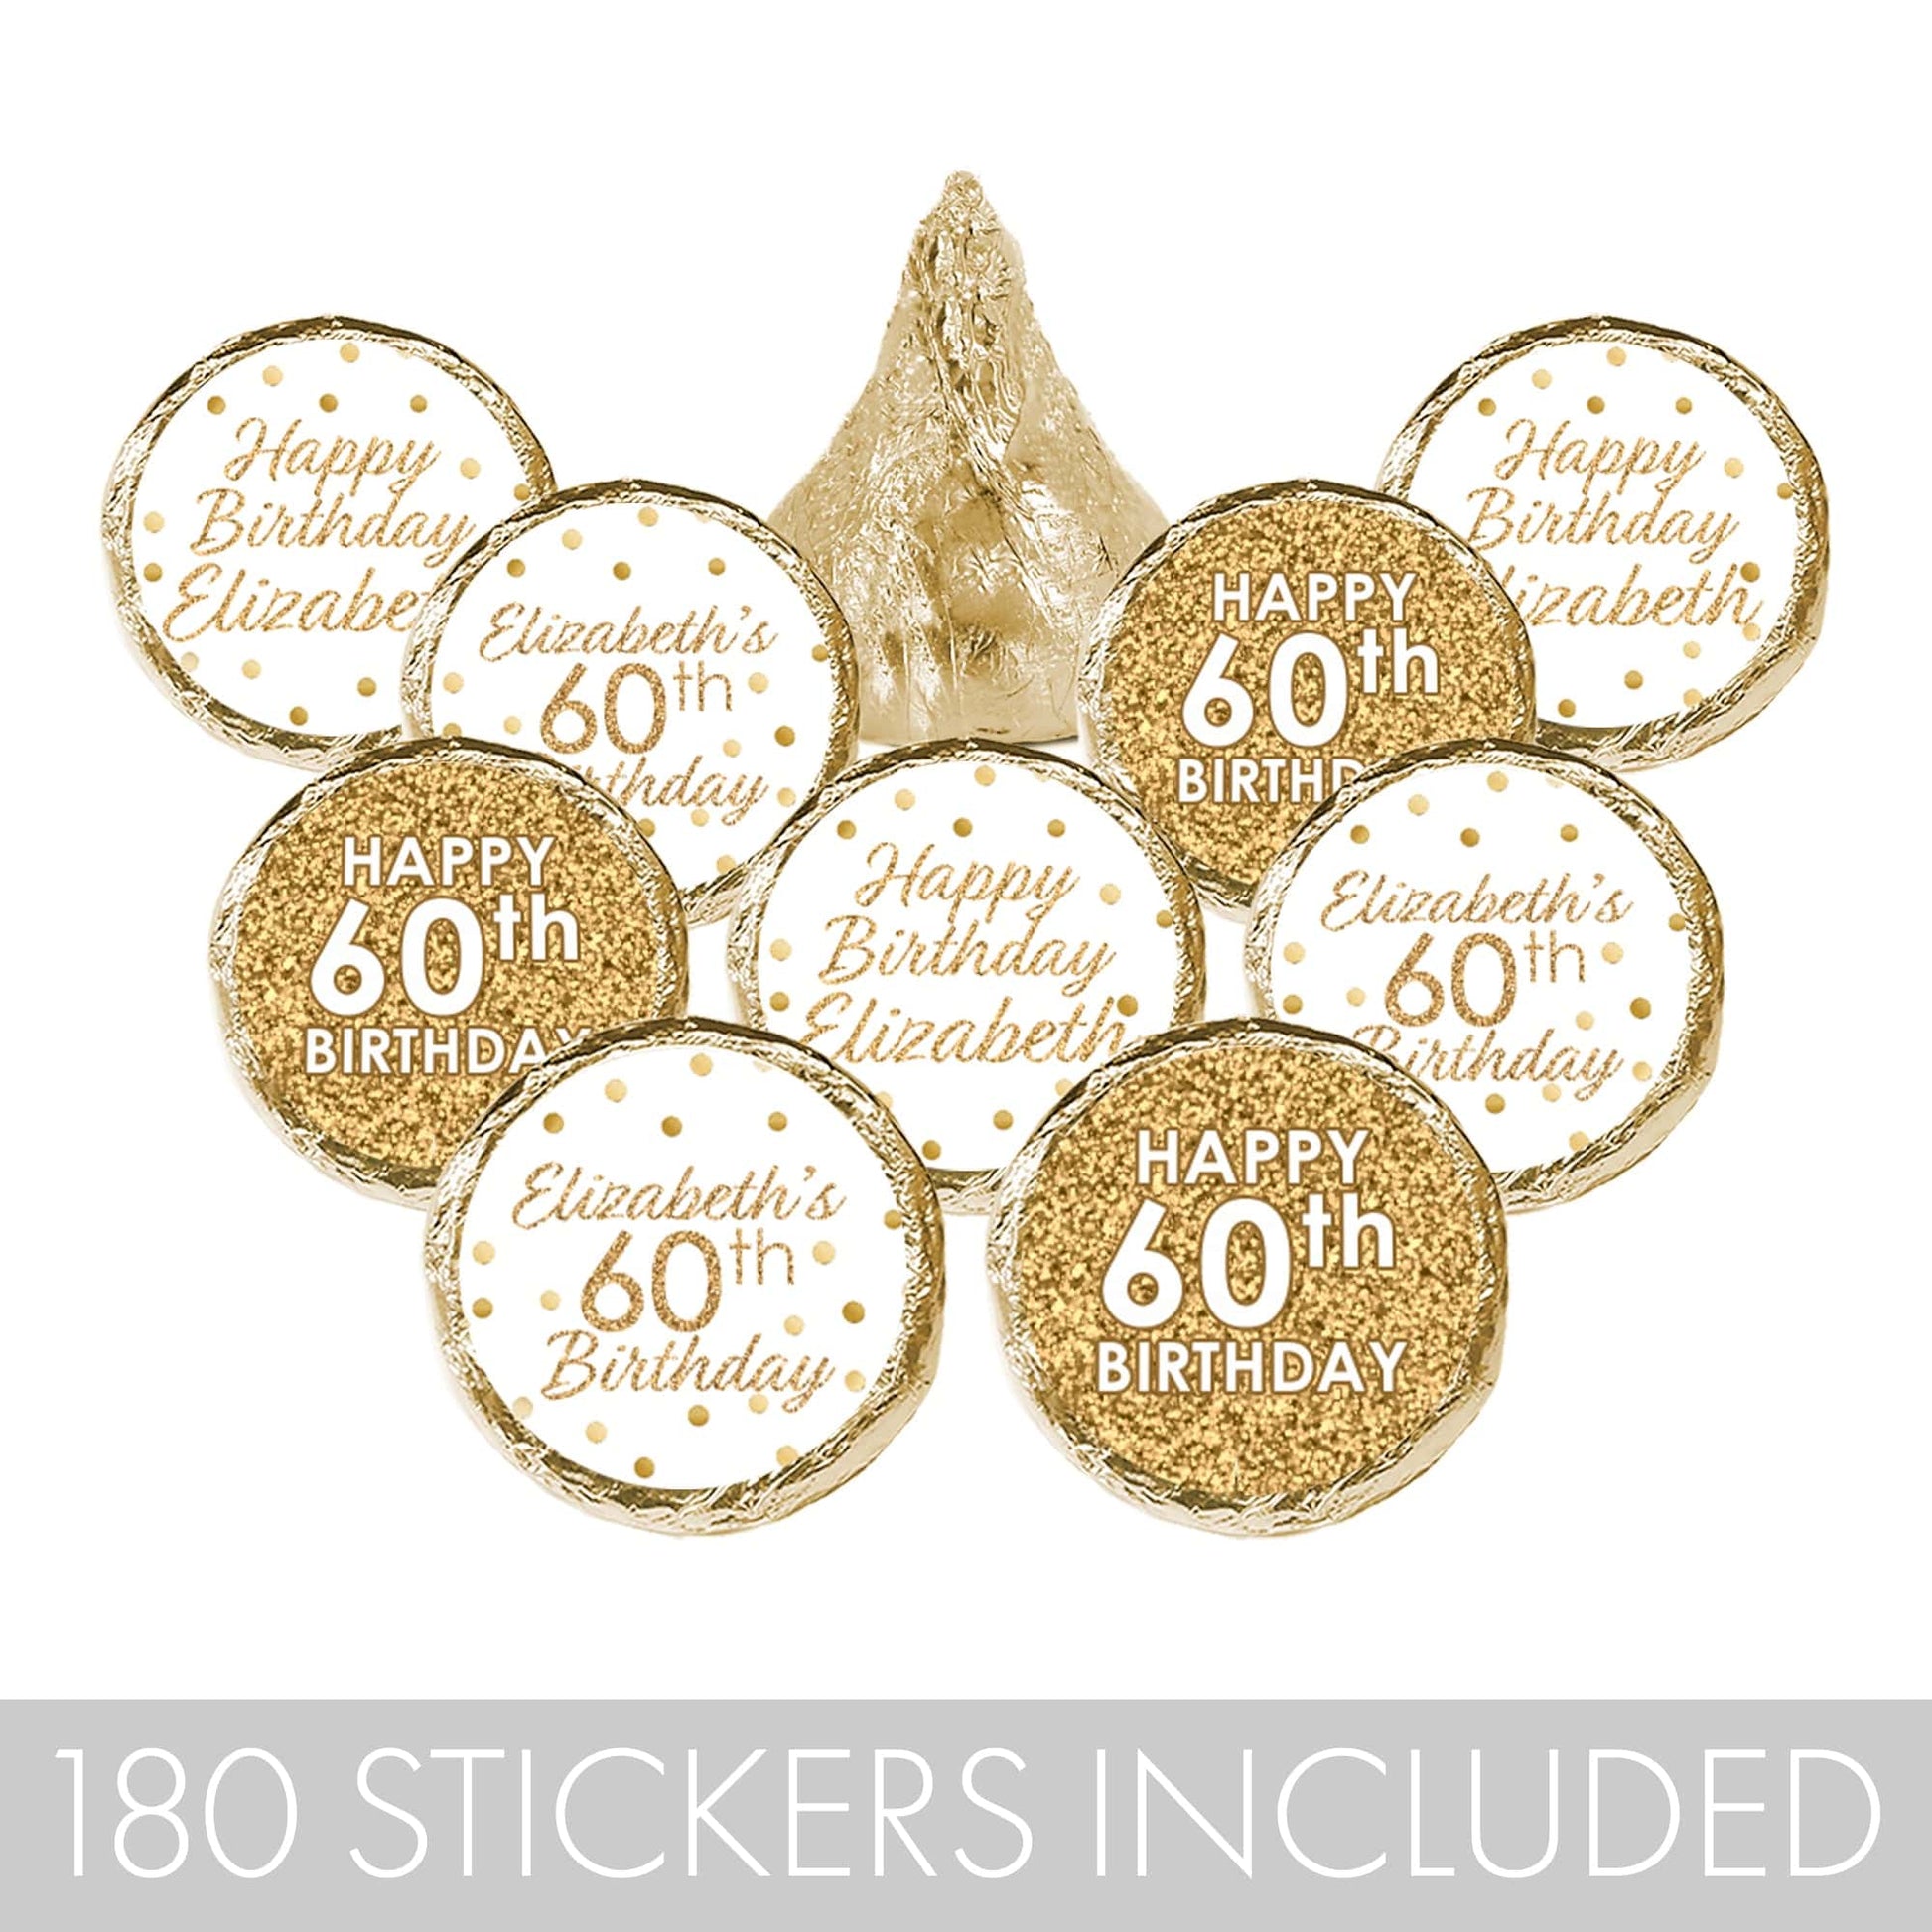 Personalized White and Gold Birthday Party Favor Stickers - 180 Count